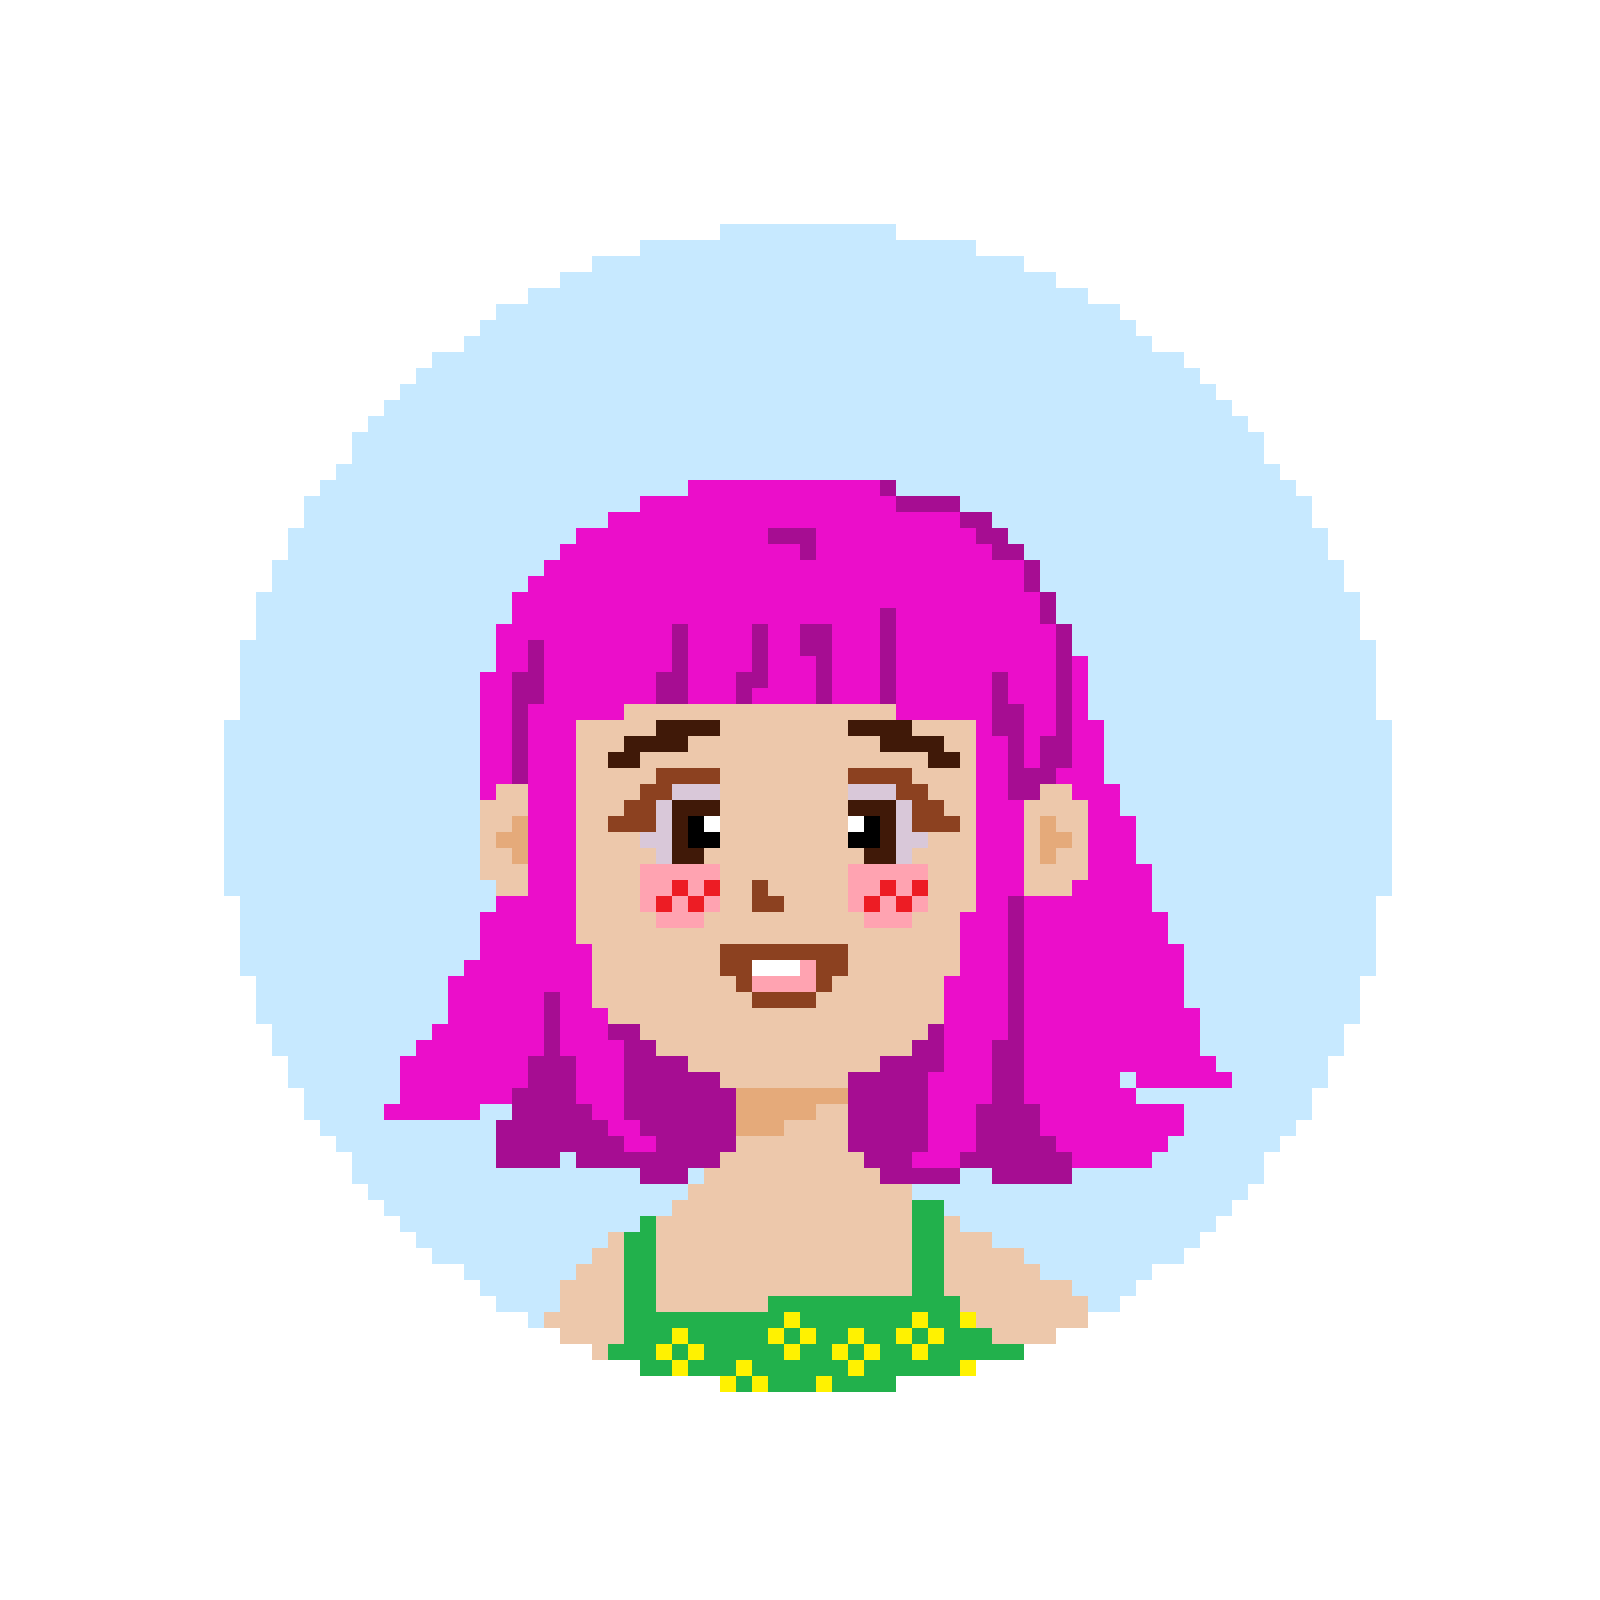 An avatar of me in pixel art; I have bright pink hair, a green top with a yellow flower pattern, and a shining smile! Click here to learn more about me